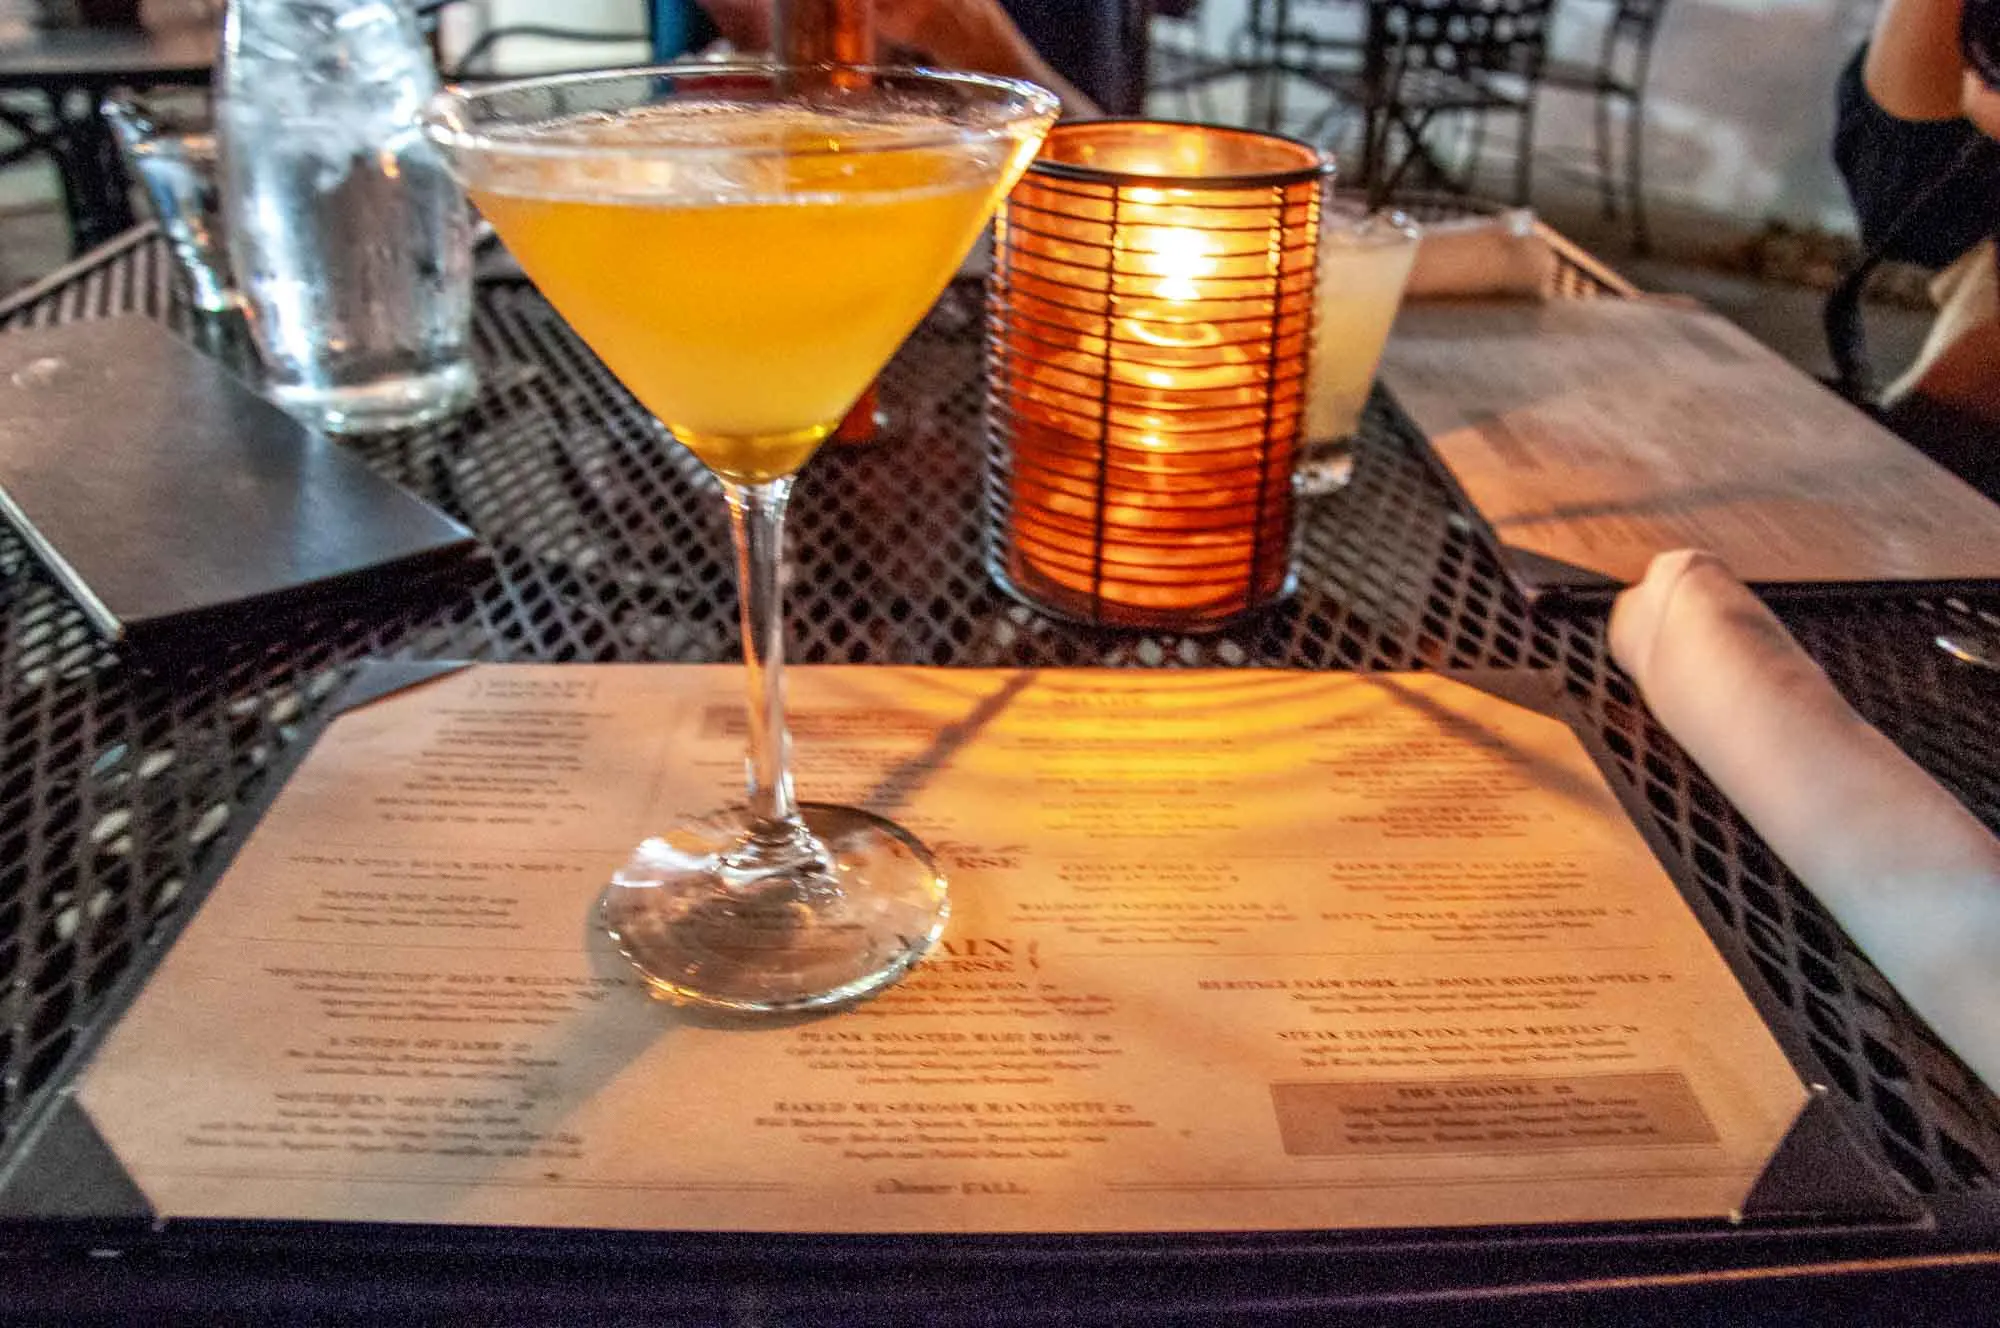 Martini glass and candle on an outdoor restaurant table